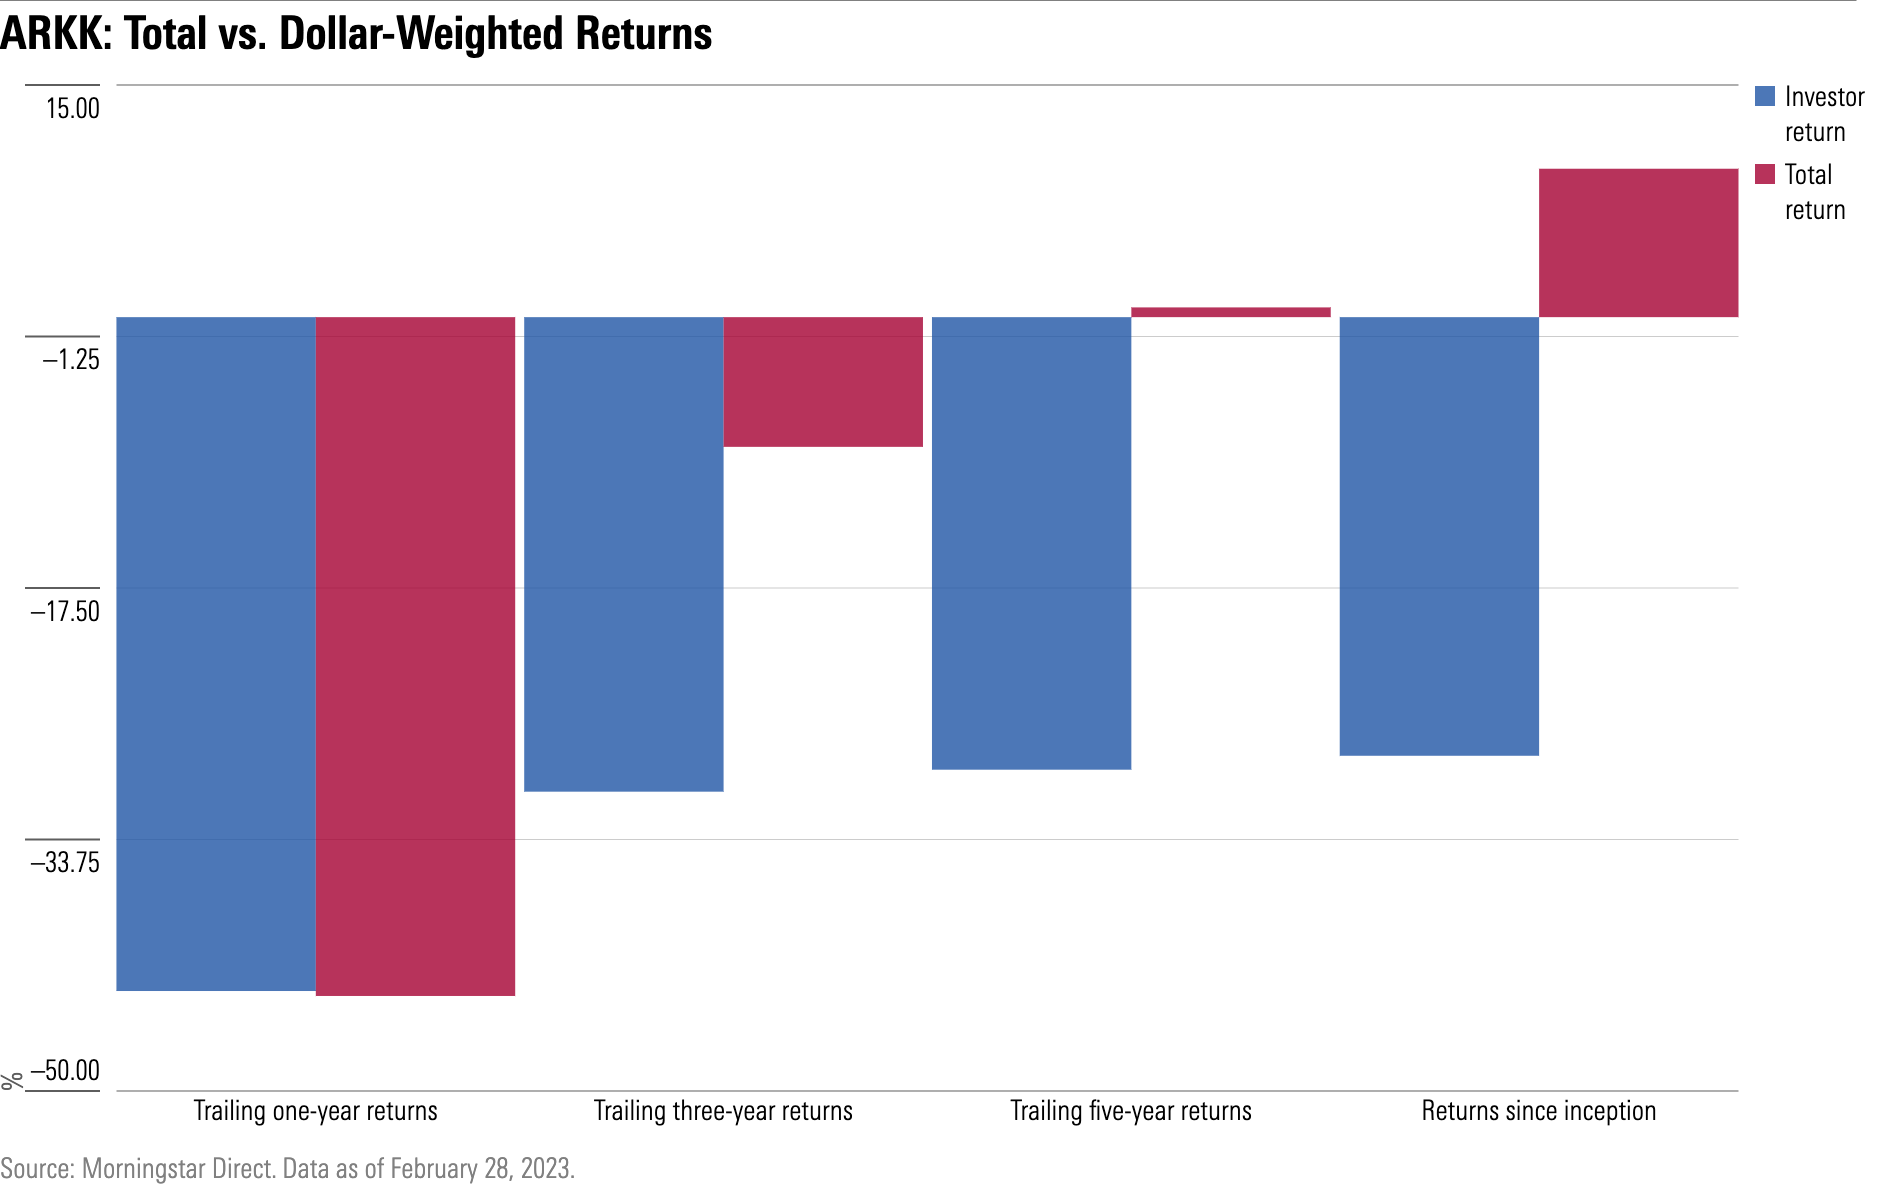 Bar chart showing the differences between the fund’s total returns and dollar-weighted returns over various periods since inception.